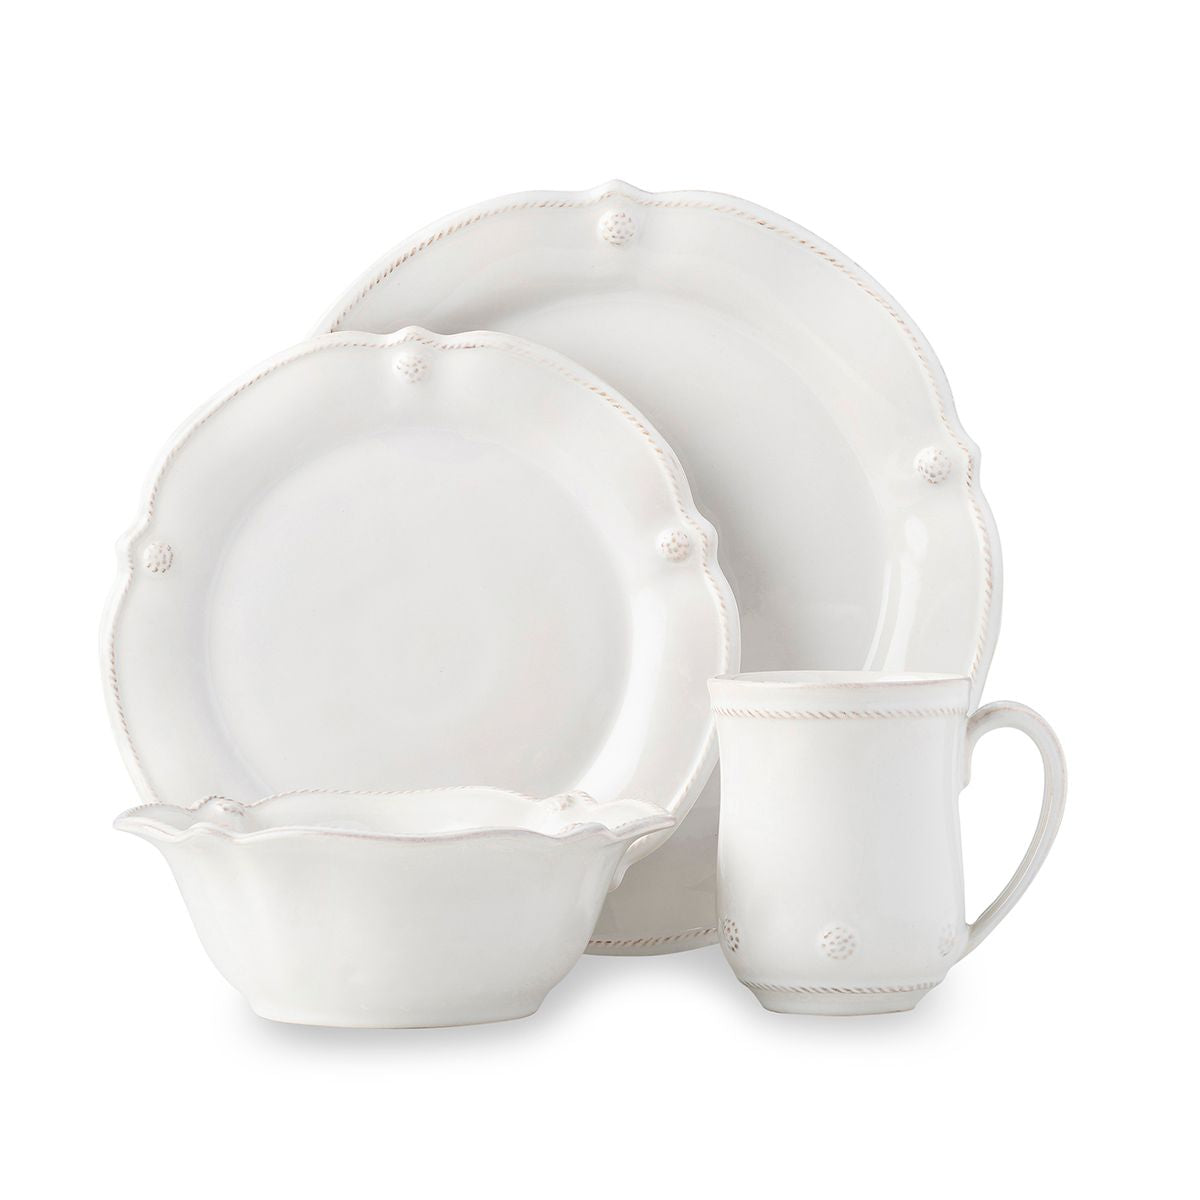 Berry & Thread Whitewash Flared 4pc Place Setting